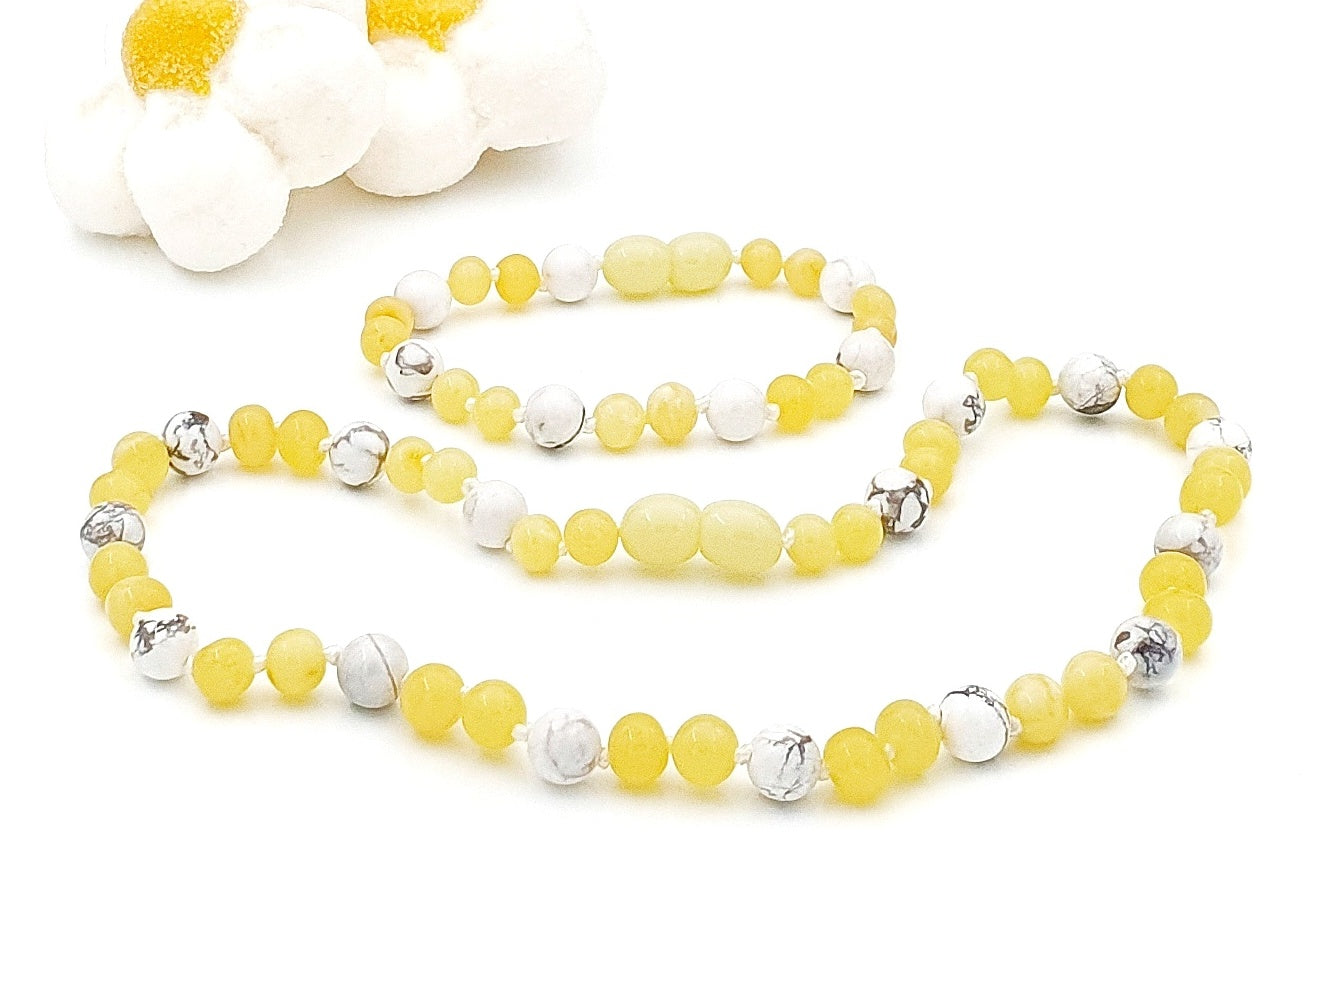 white Baltic amber jewelry with howlite stones